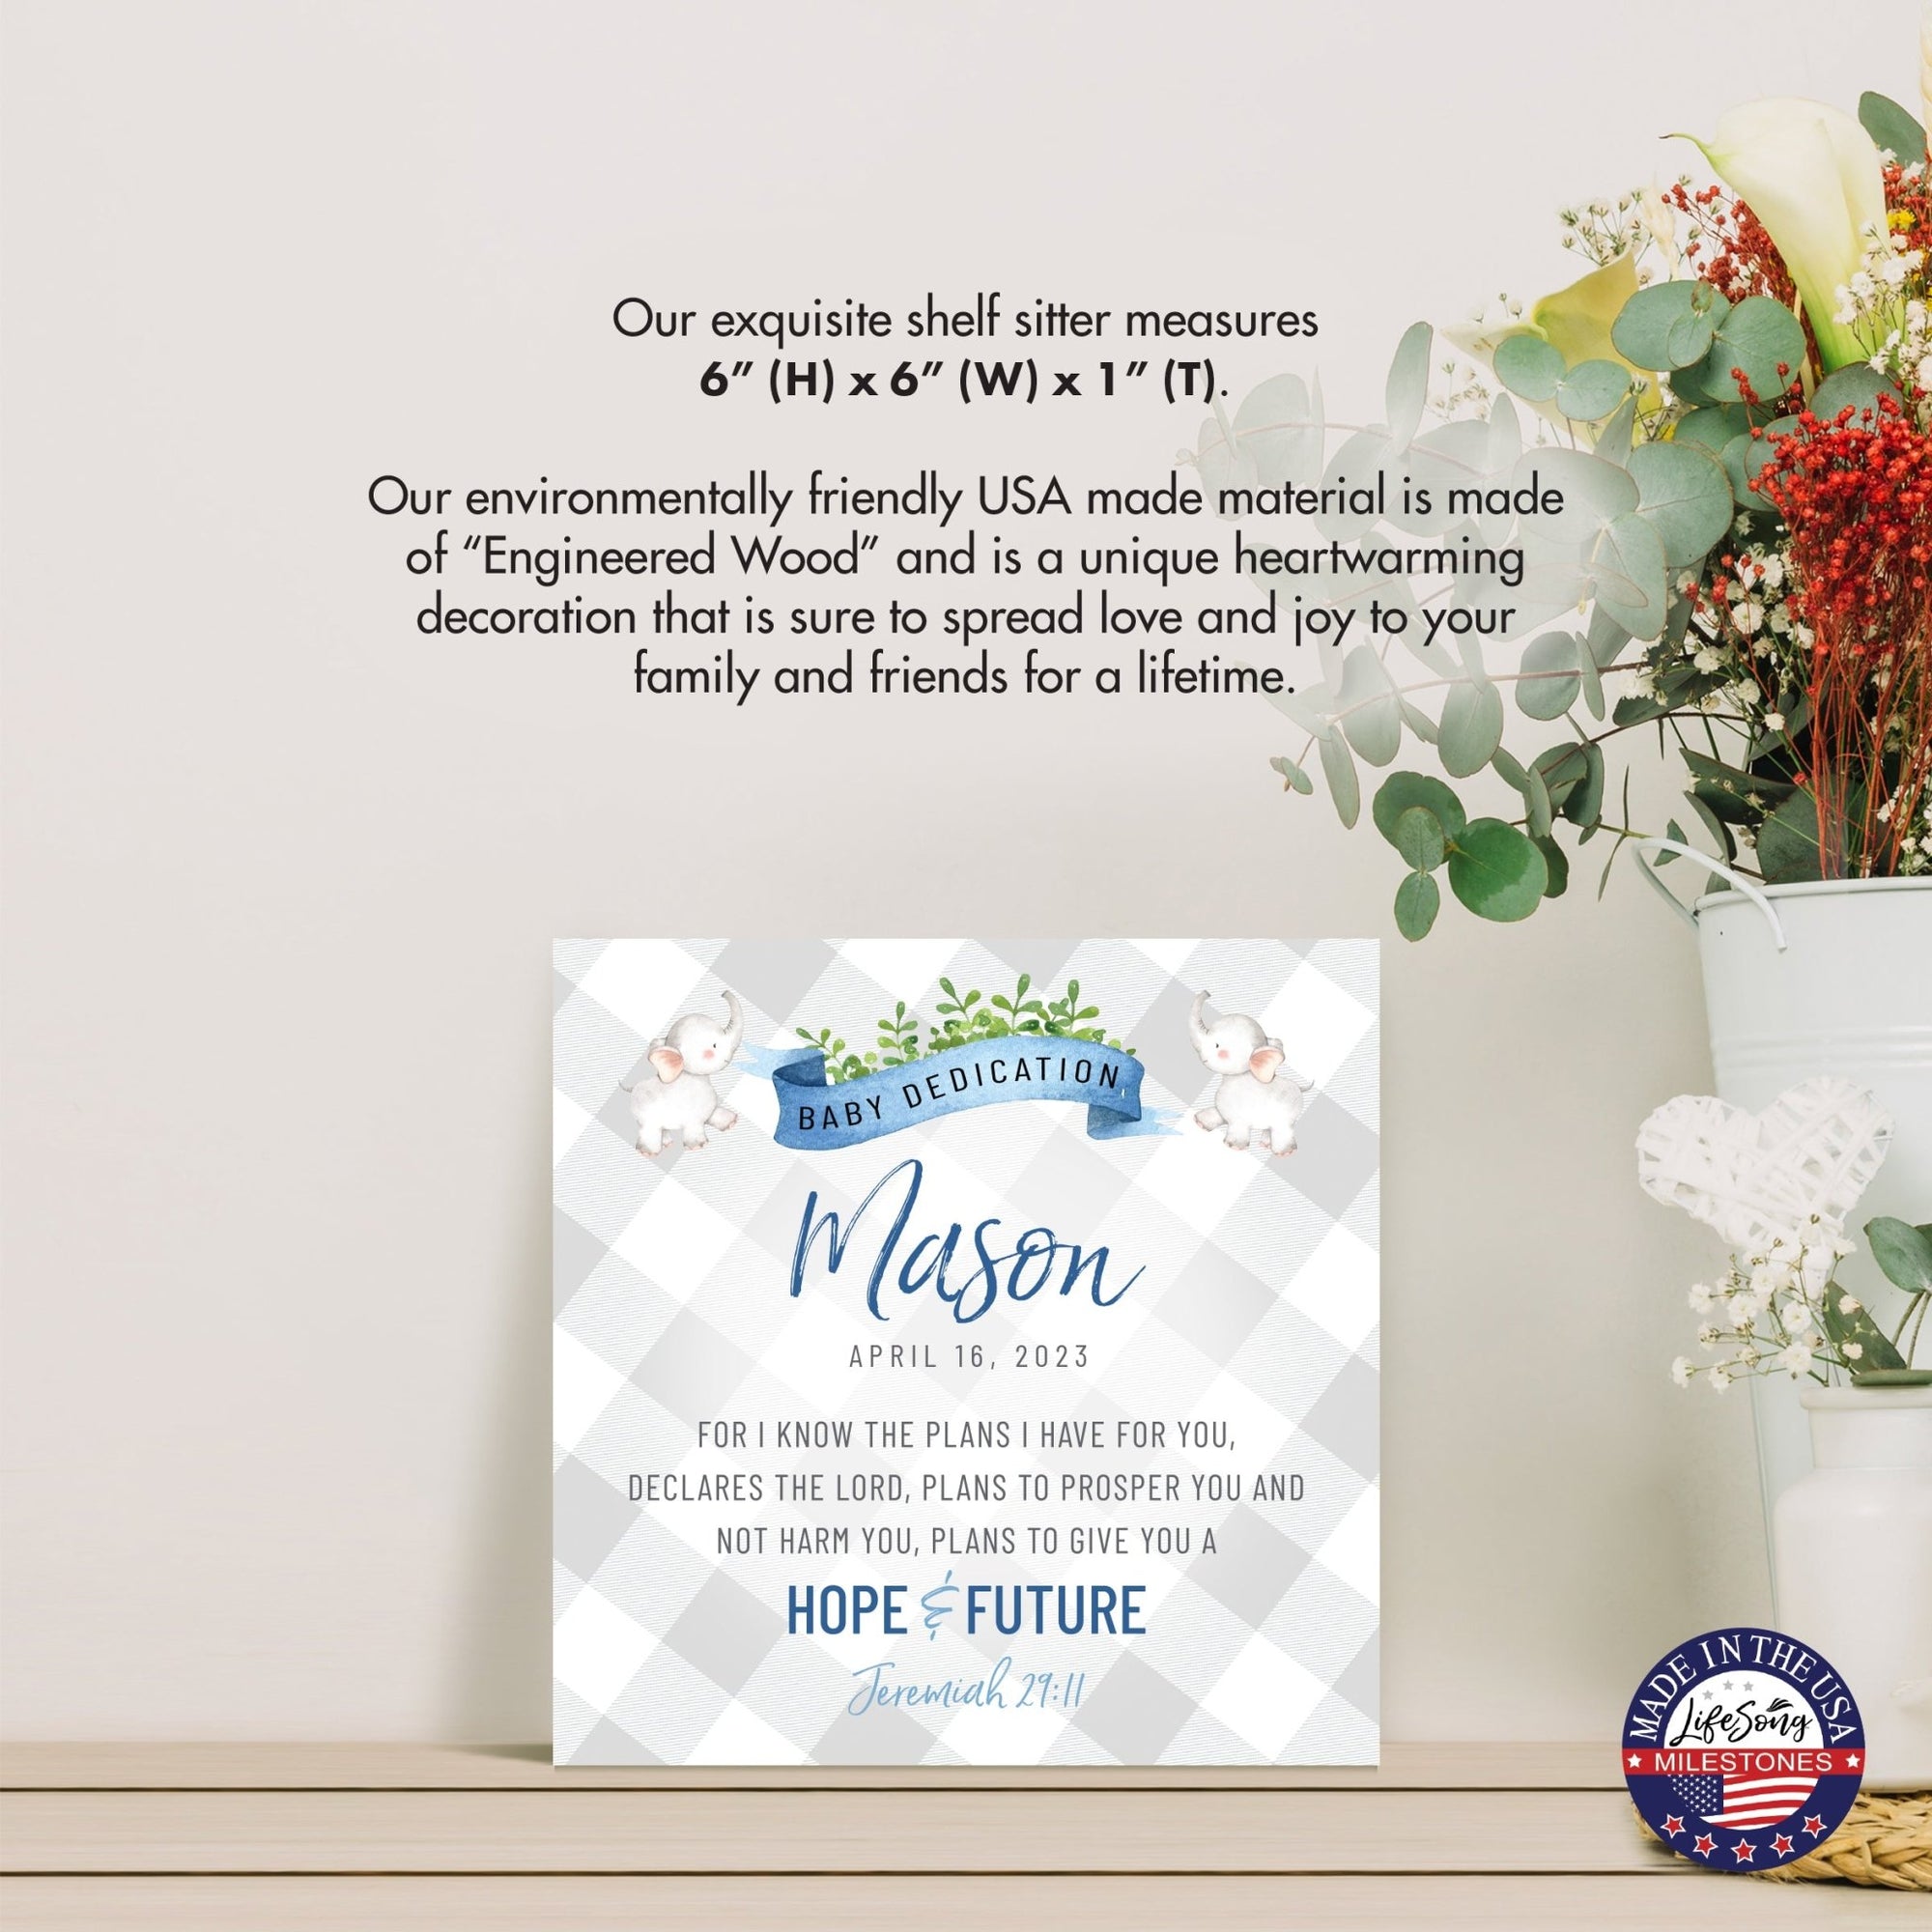 Personalized Shelf Décor and Tabletop Signs for Baby Dedication - LifeSong Milestones